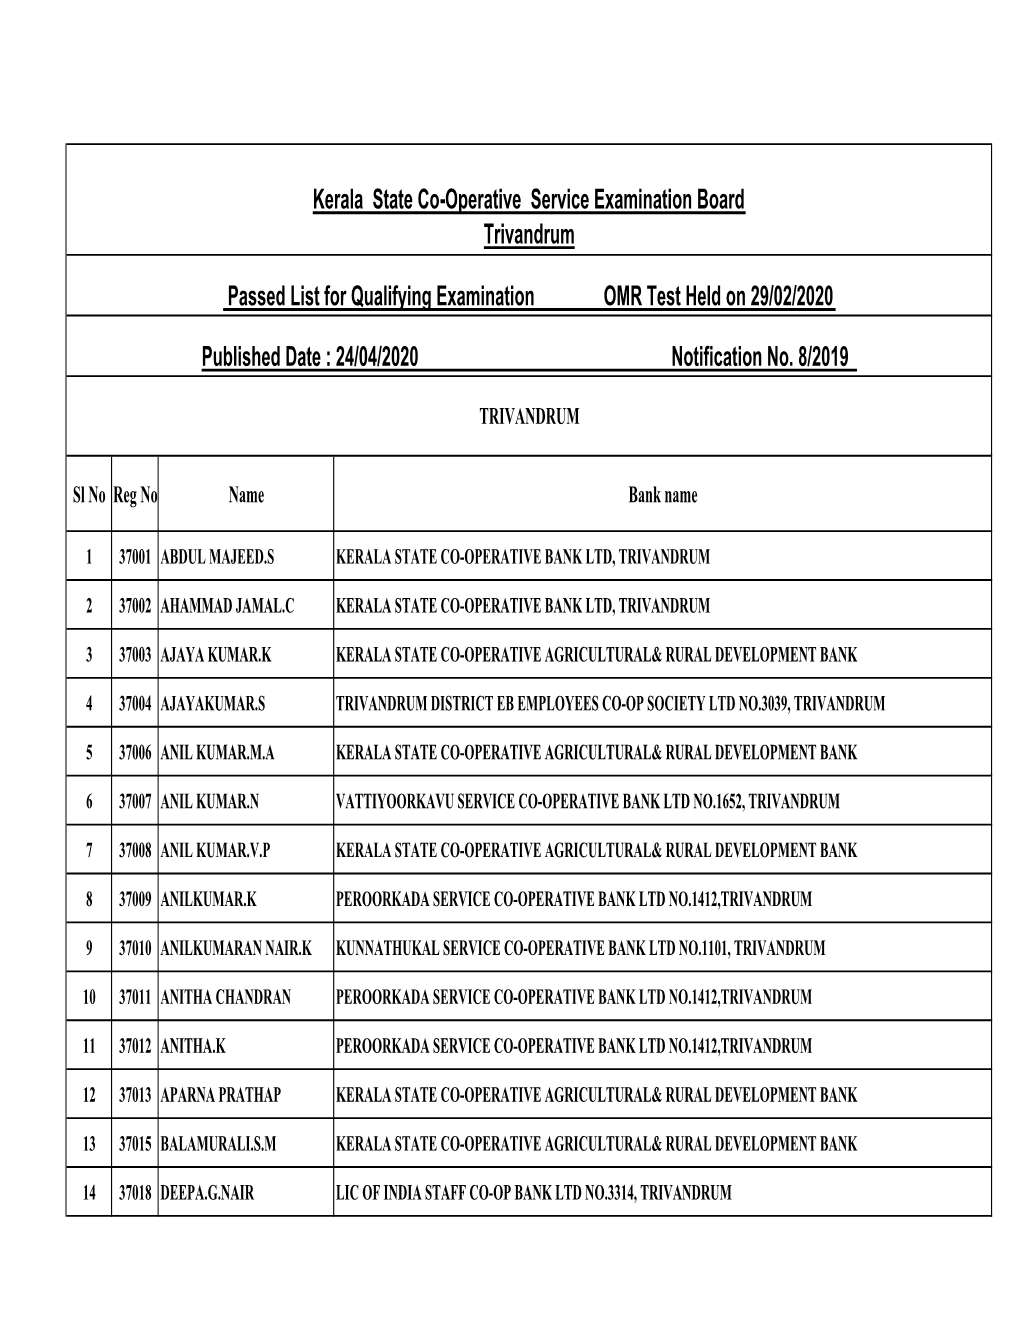 Passed List for Qualifying Examination OMR Test Held on 29/02/2020